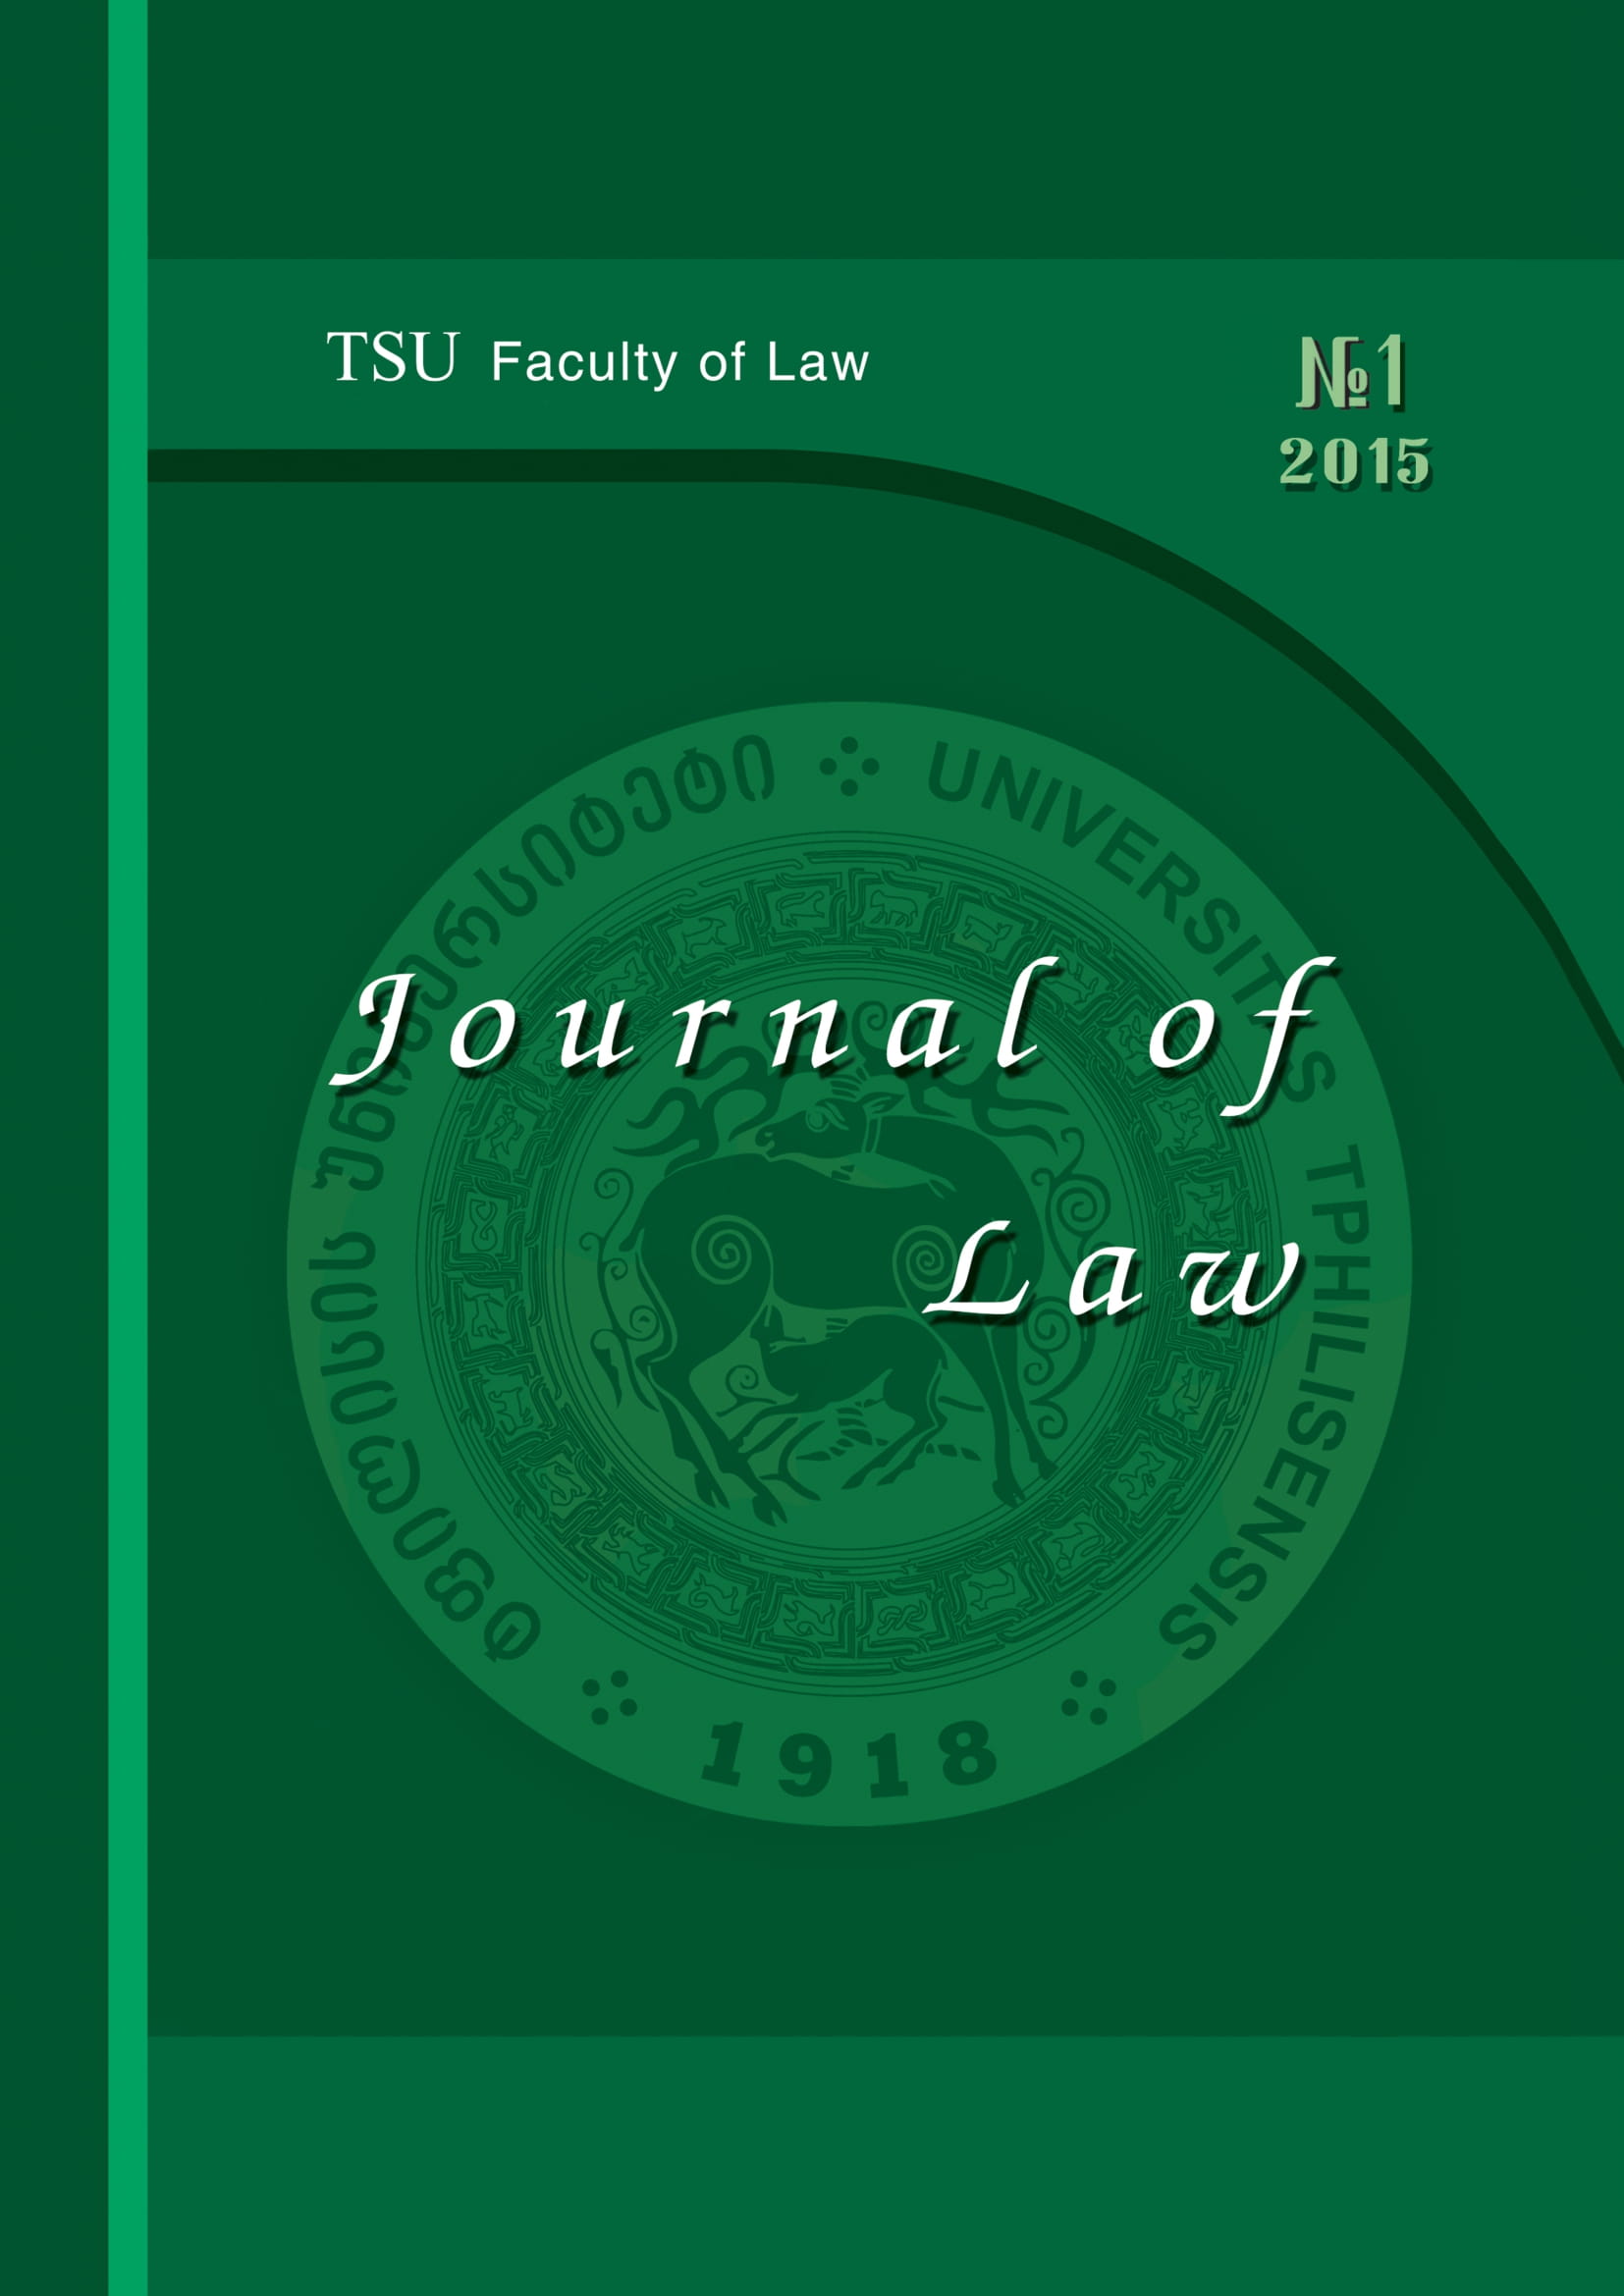 					View No. 1 (2015):  Journal of Law
				